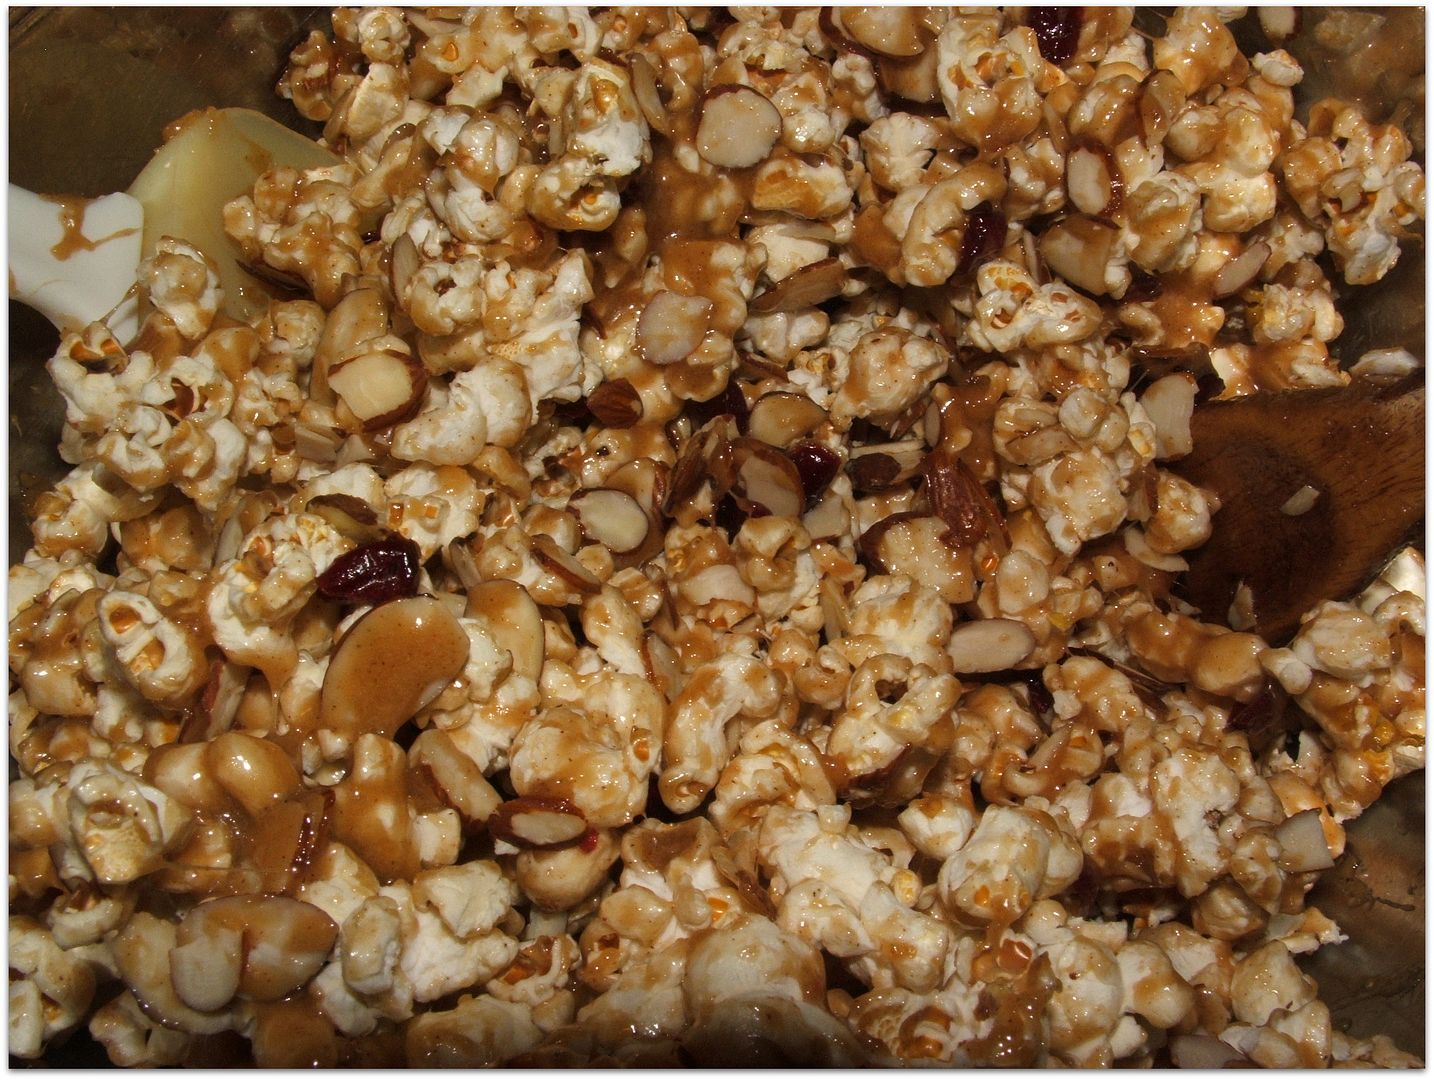 caramel popcorn by Angie Ouellette-Tower for godsgrowinggarden.com photo 006_zpsdab0e334.jpg